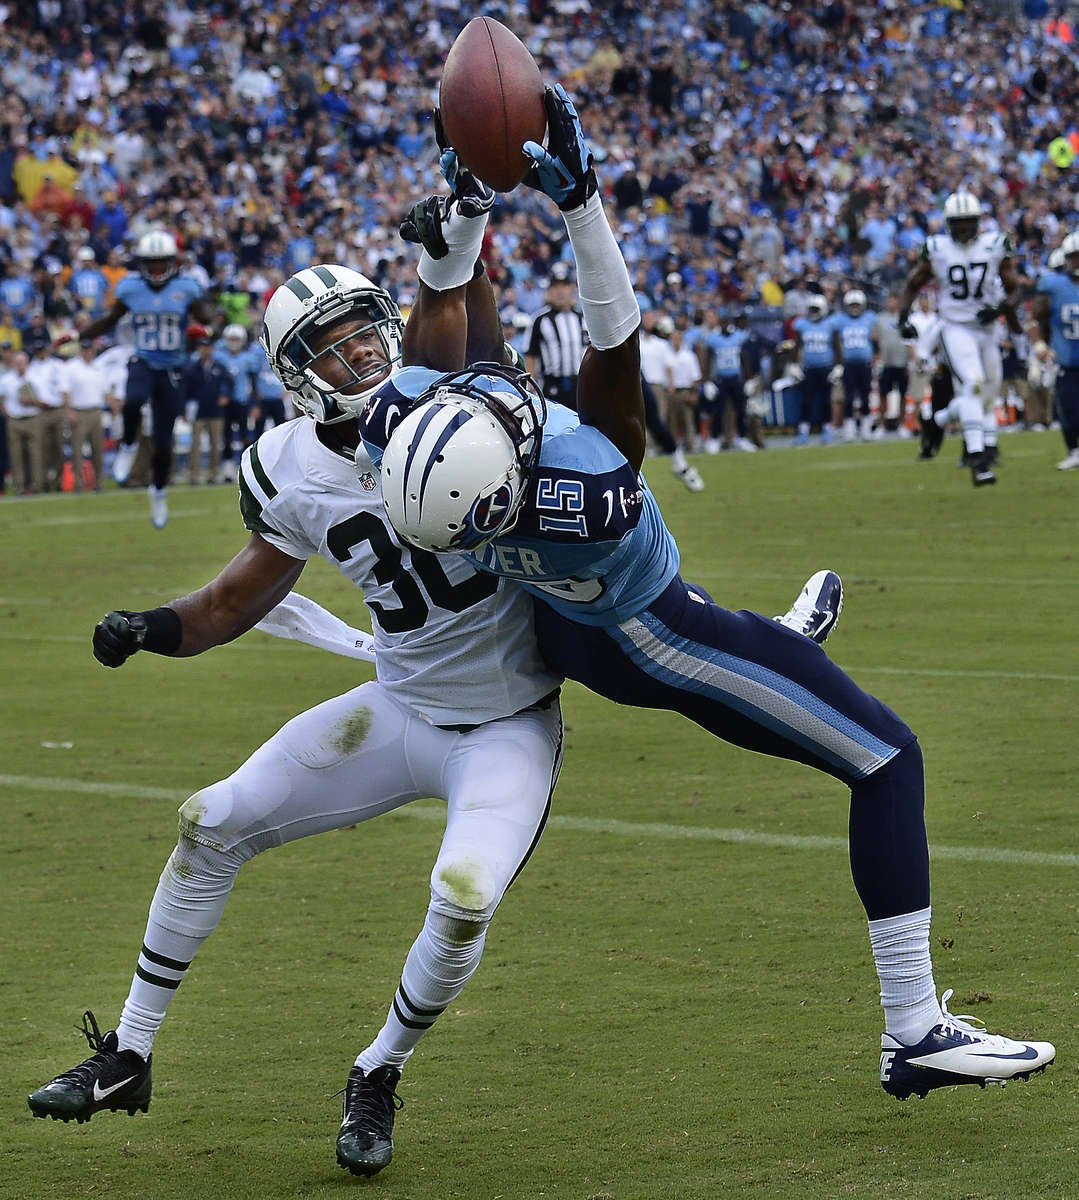 Tennessee Titans wide receiver Justin Hunter catches a 16-yard touchdown pass as he is defended by New York Jets cornerback Darrin Walls in the second quarter of an NFL football game on Sept. 29, 2013, in Nashville, Tenn. (AP Photo/ Mark Zaleski)